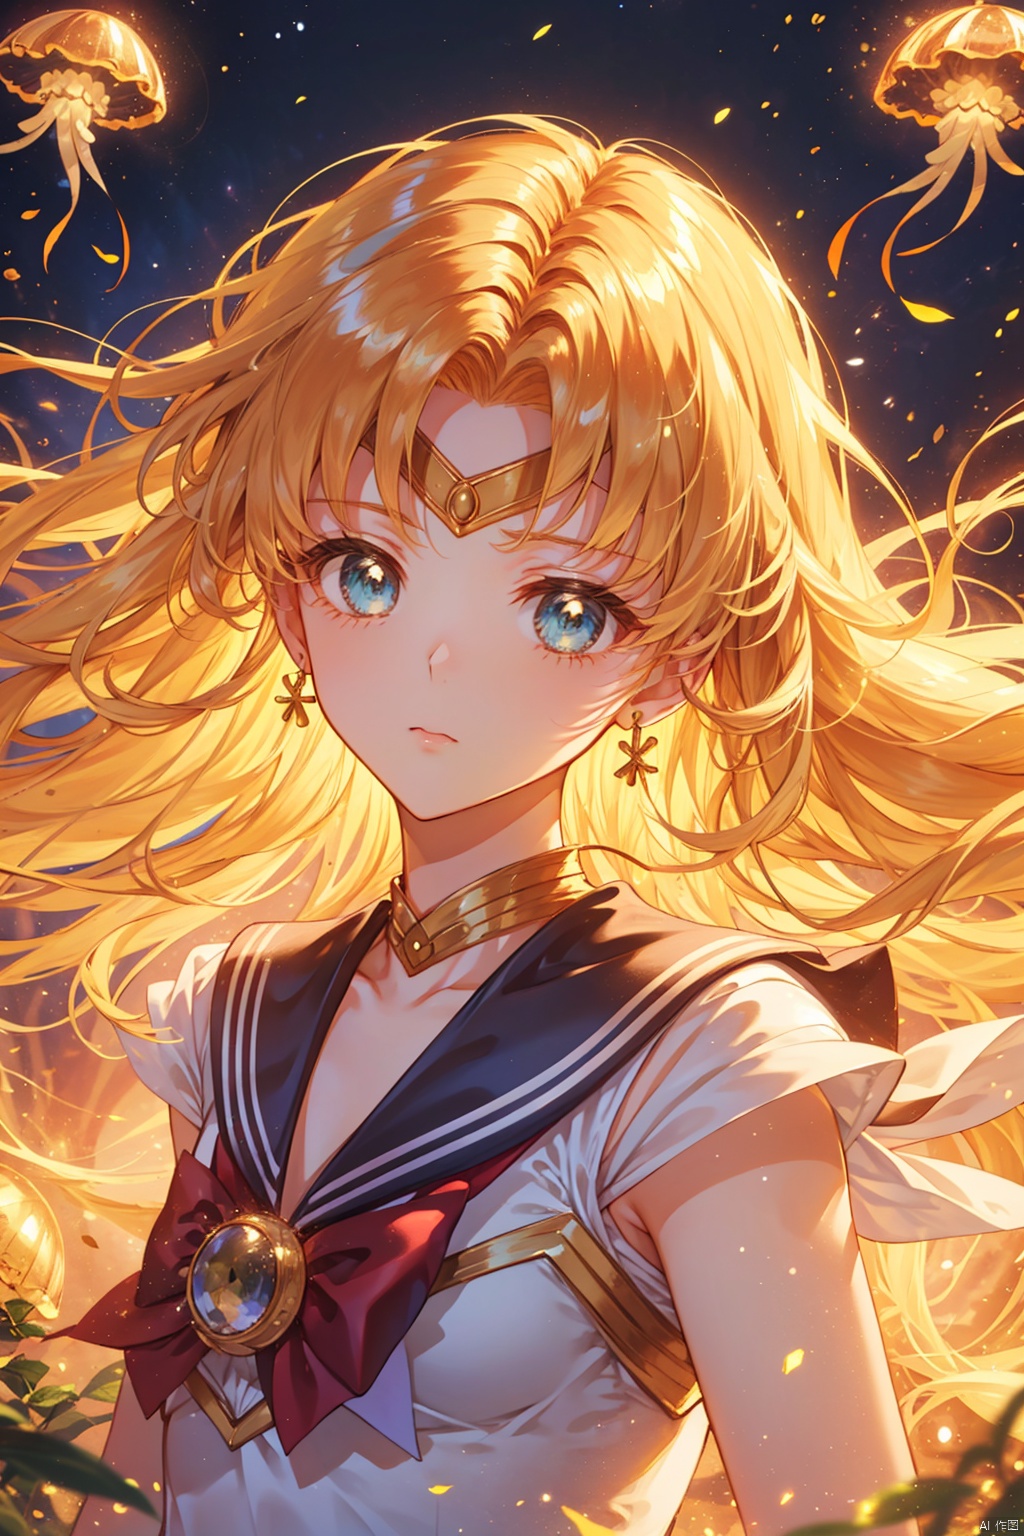 The beautiful warrior Sailor Moon is running through the forest, captured in a close-up, front-facing, high-definition shot with a long-focus lens, basking in natural light. Her flowing, bright-colored hair exudes confidence., (\shen ming shao nv\), msn, jellyfishforest